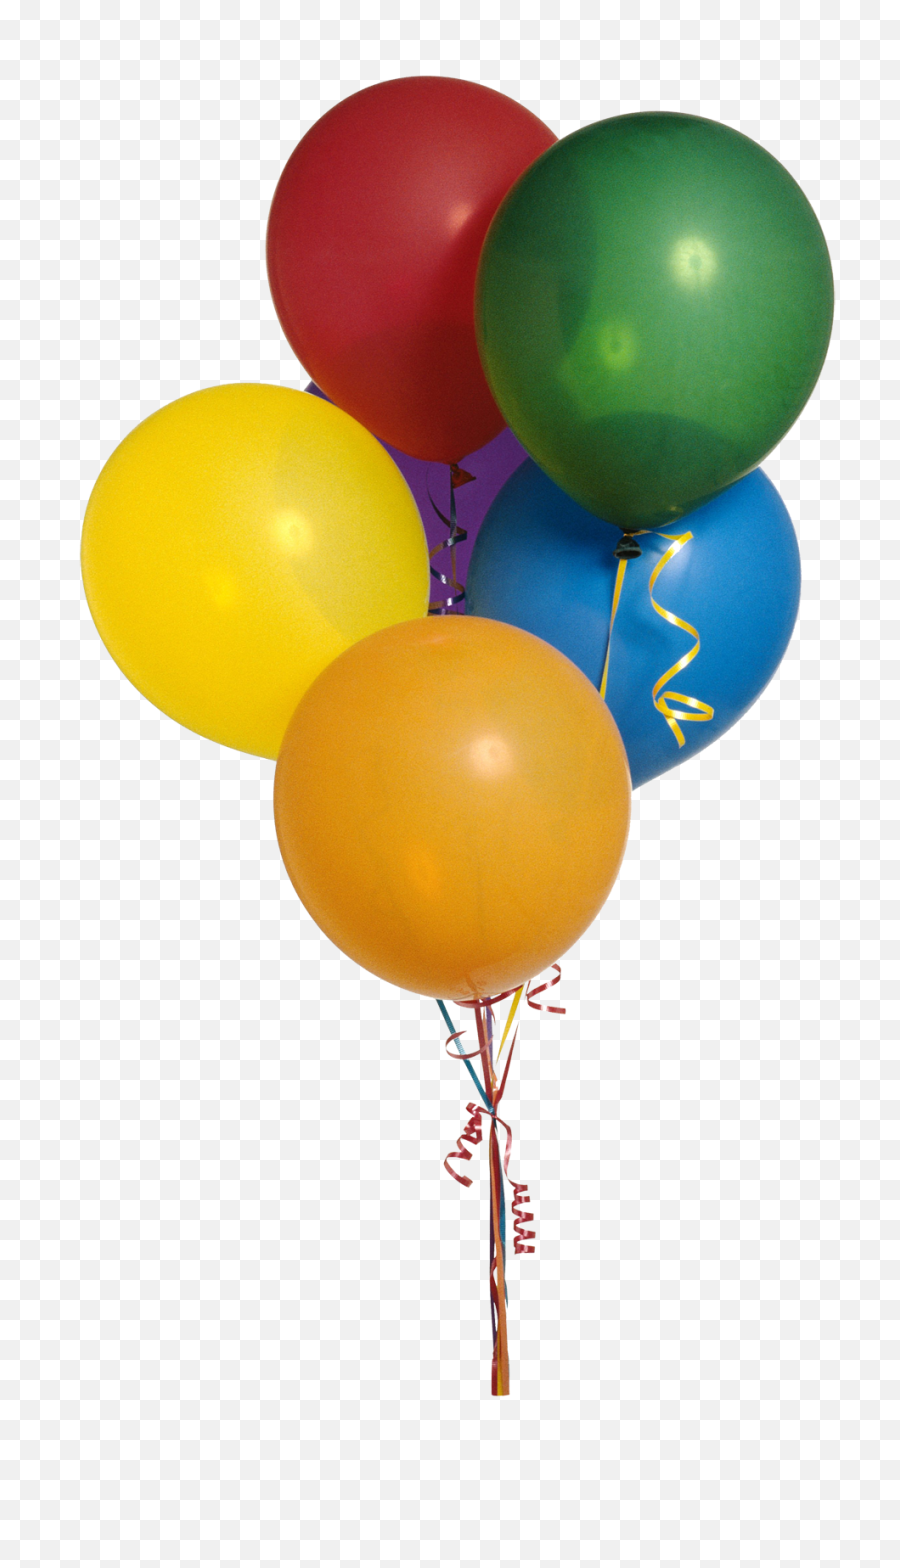 Real Balloons Png Image - Real Balloons Transparent Background,Real Balloons Png